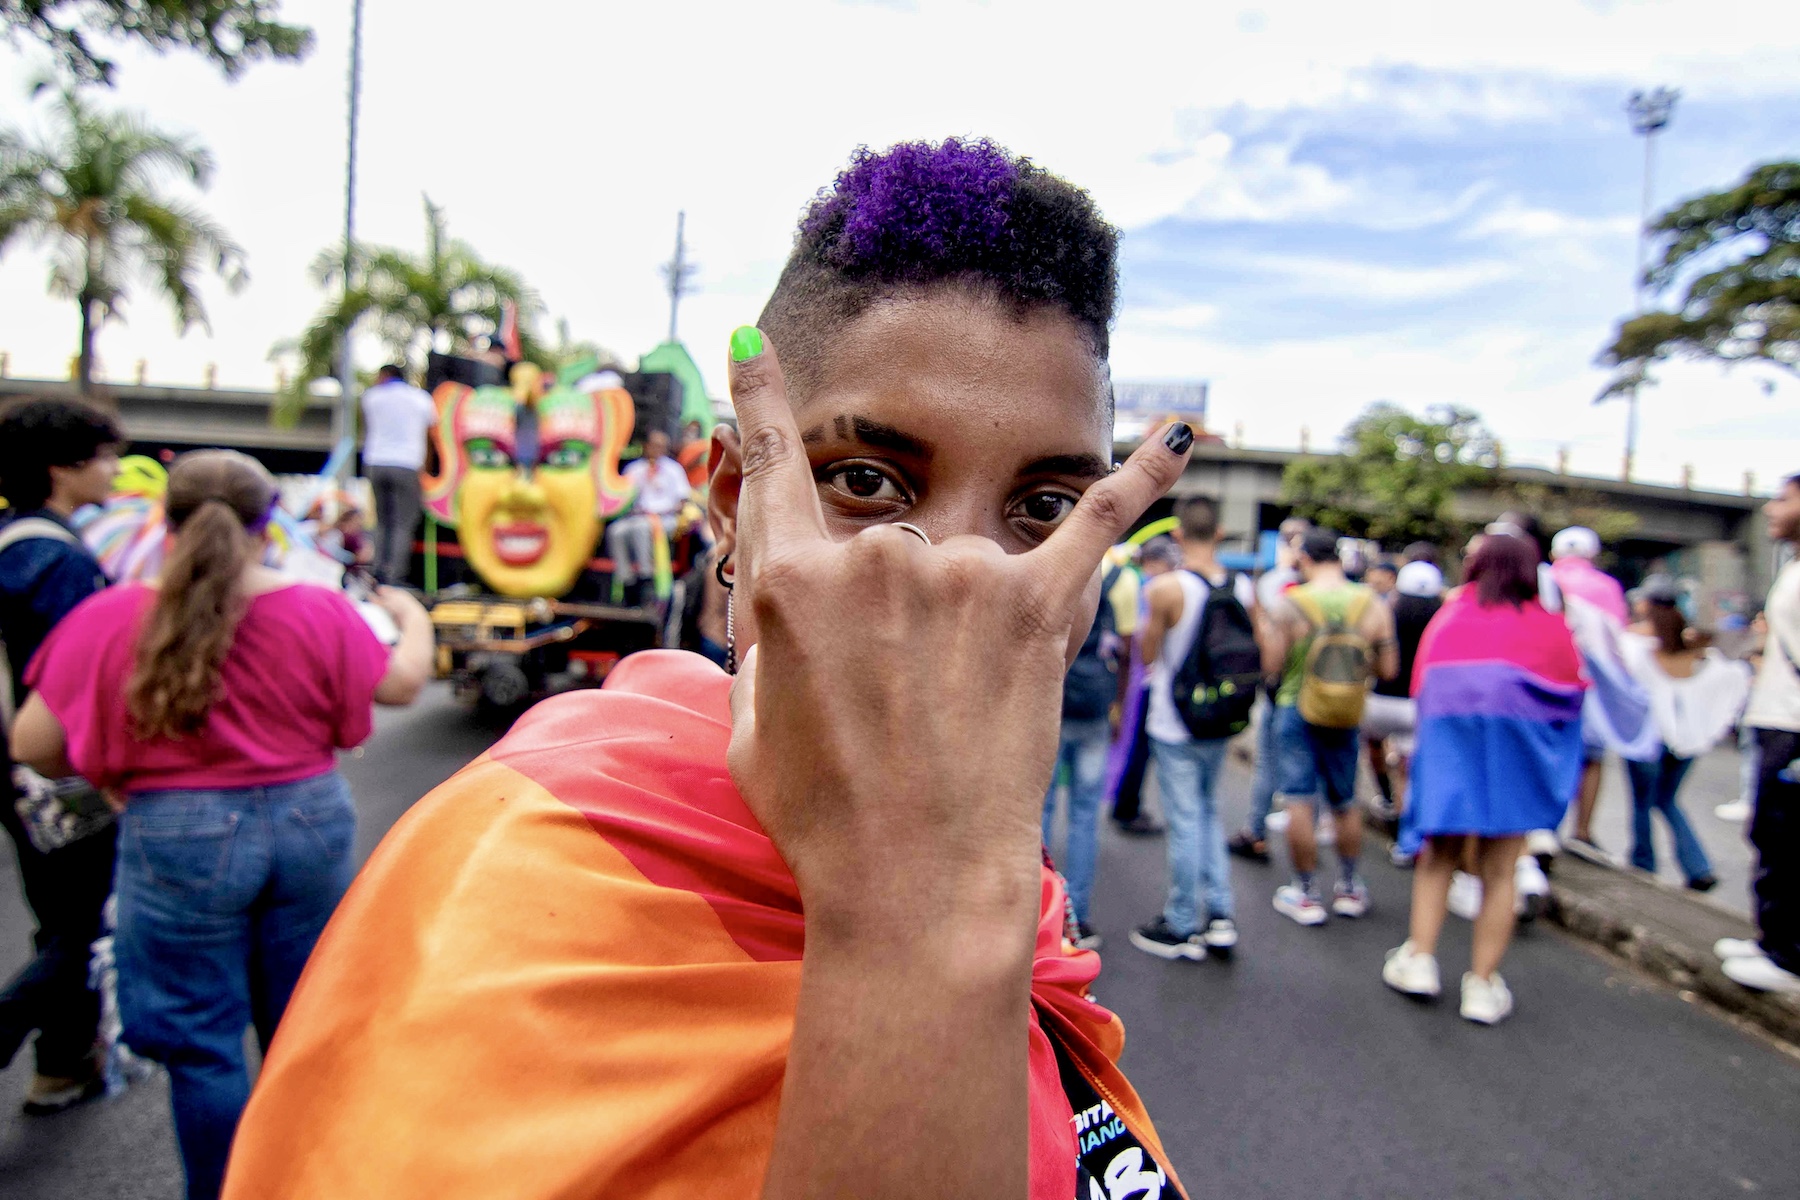 More Than 100,000 People In Colombia Held Its Biggest Ever Pride Parade To Celebrate LGBTQ Rights